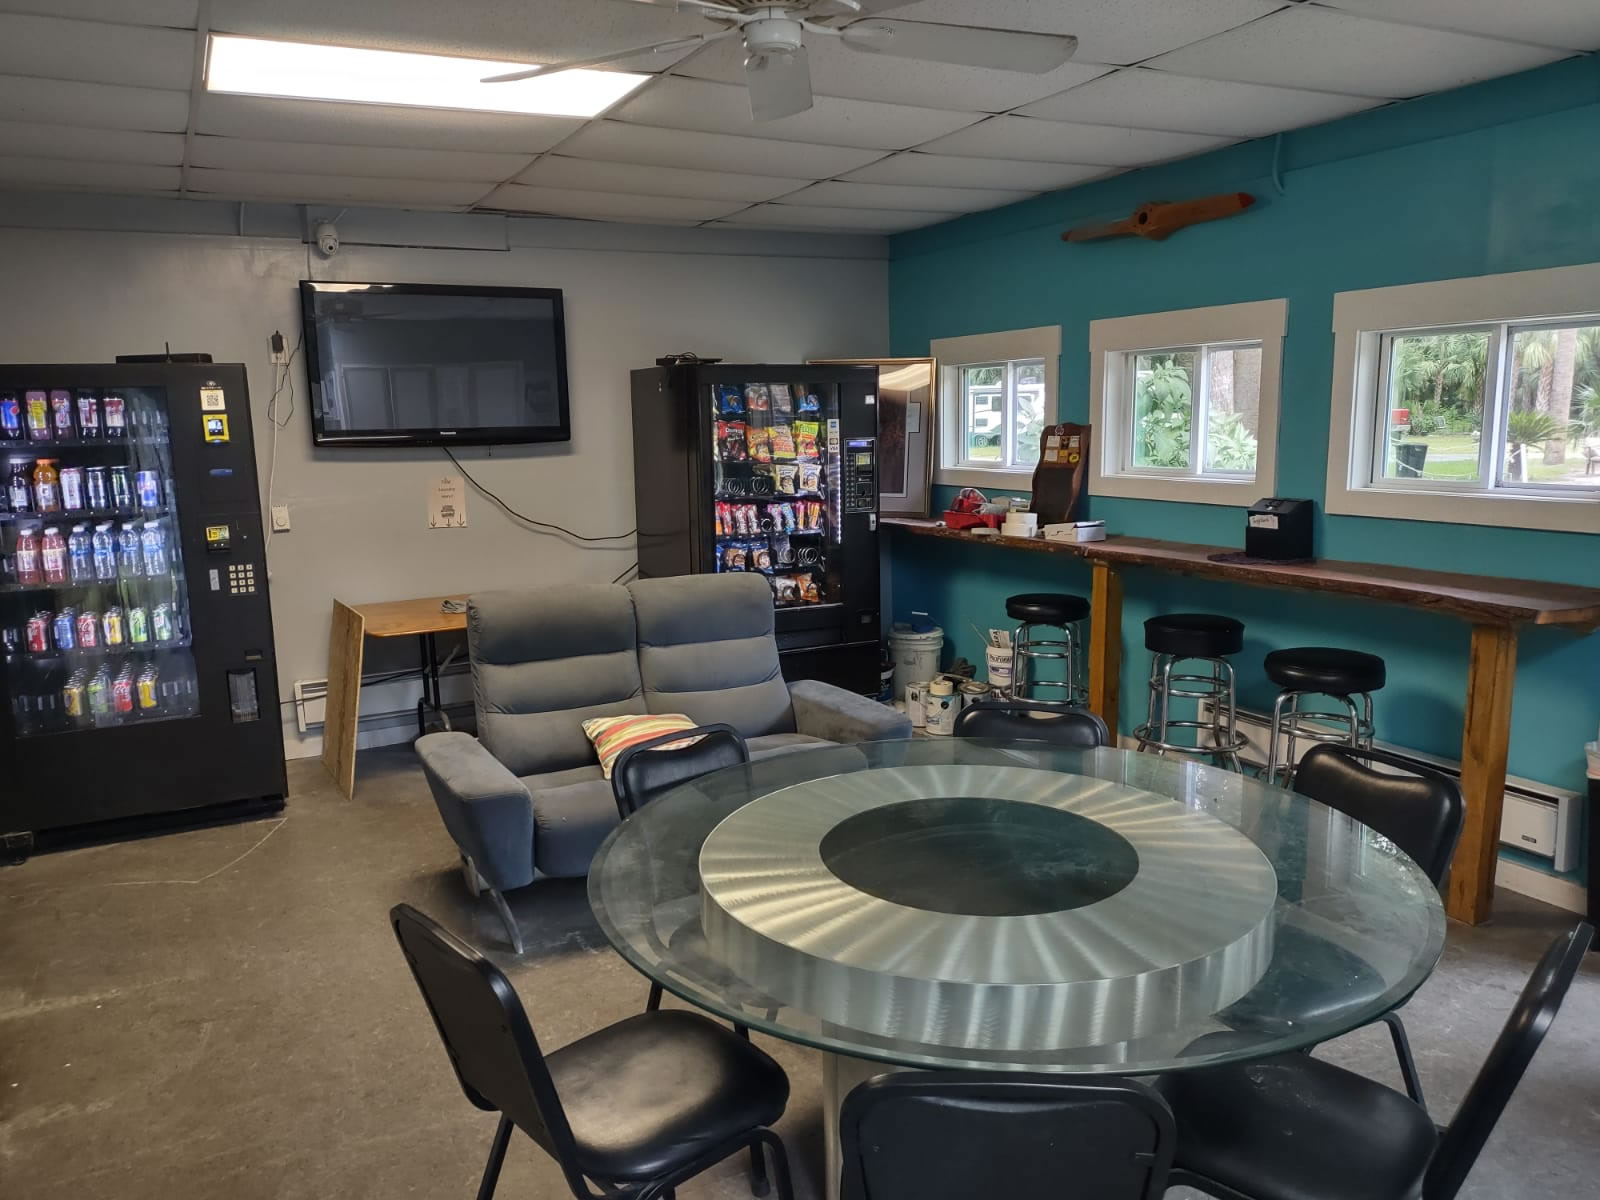 Community Clubhouse - Free Morning Coffee, Vending Machines, Coin Operated Laundry, Bathrooms/Showers, and a nice place to sit down and chat with other campers